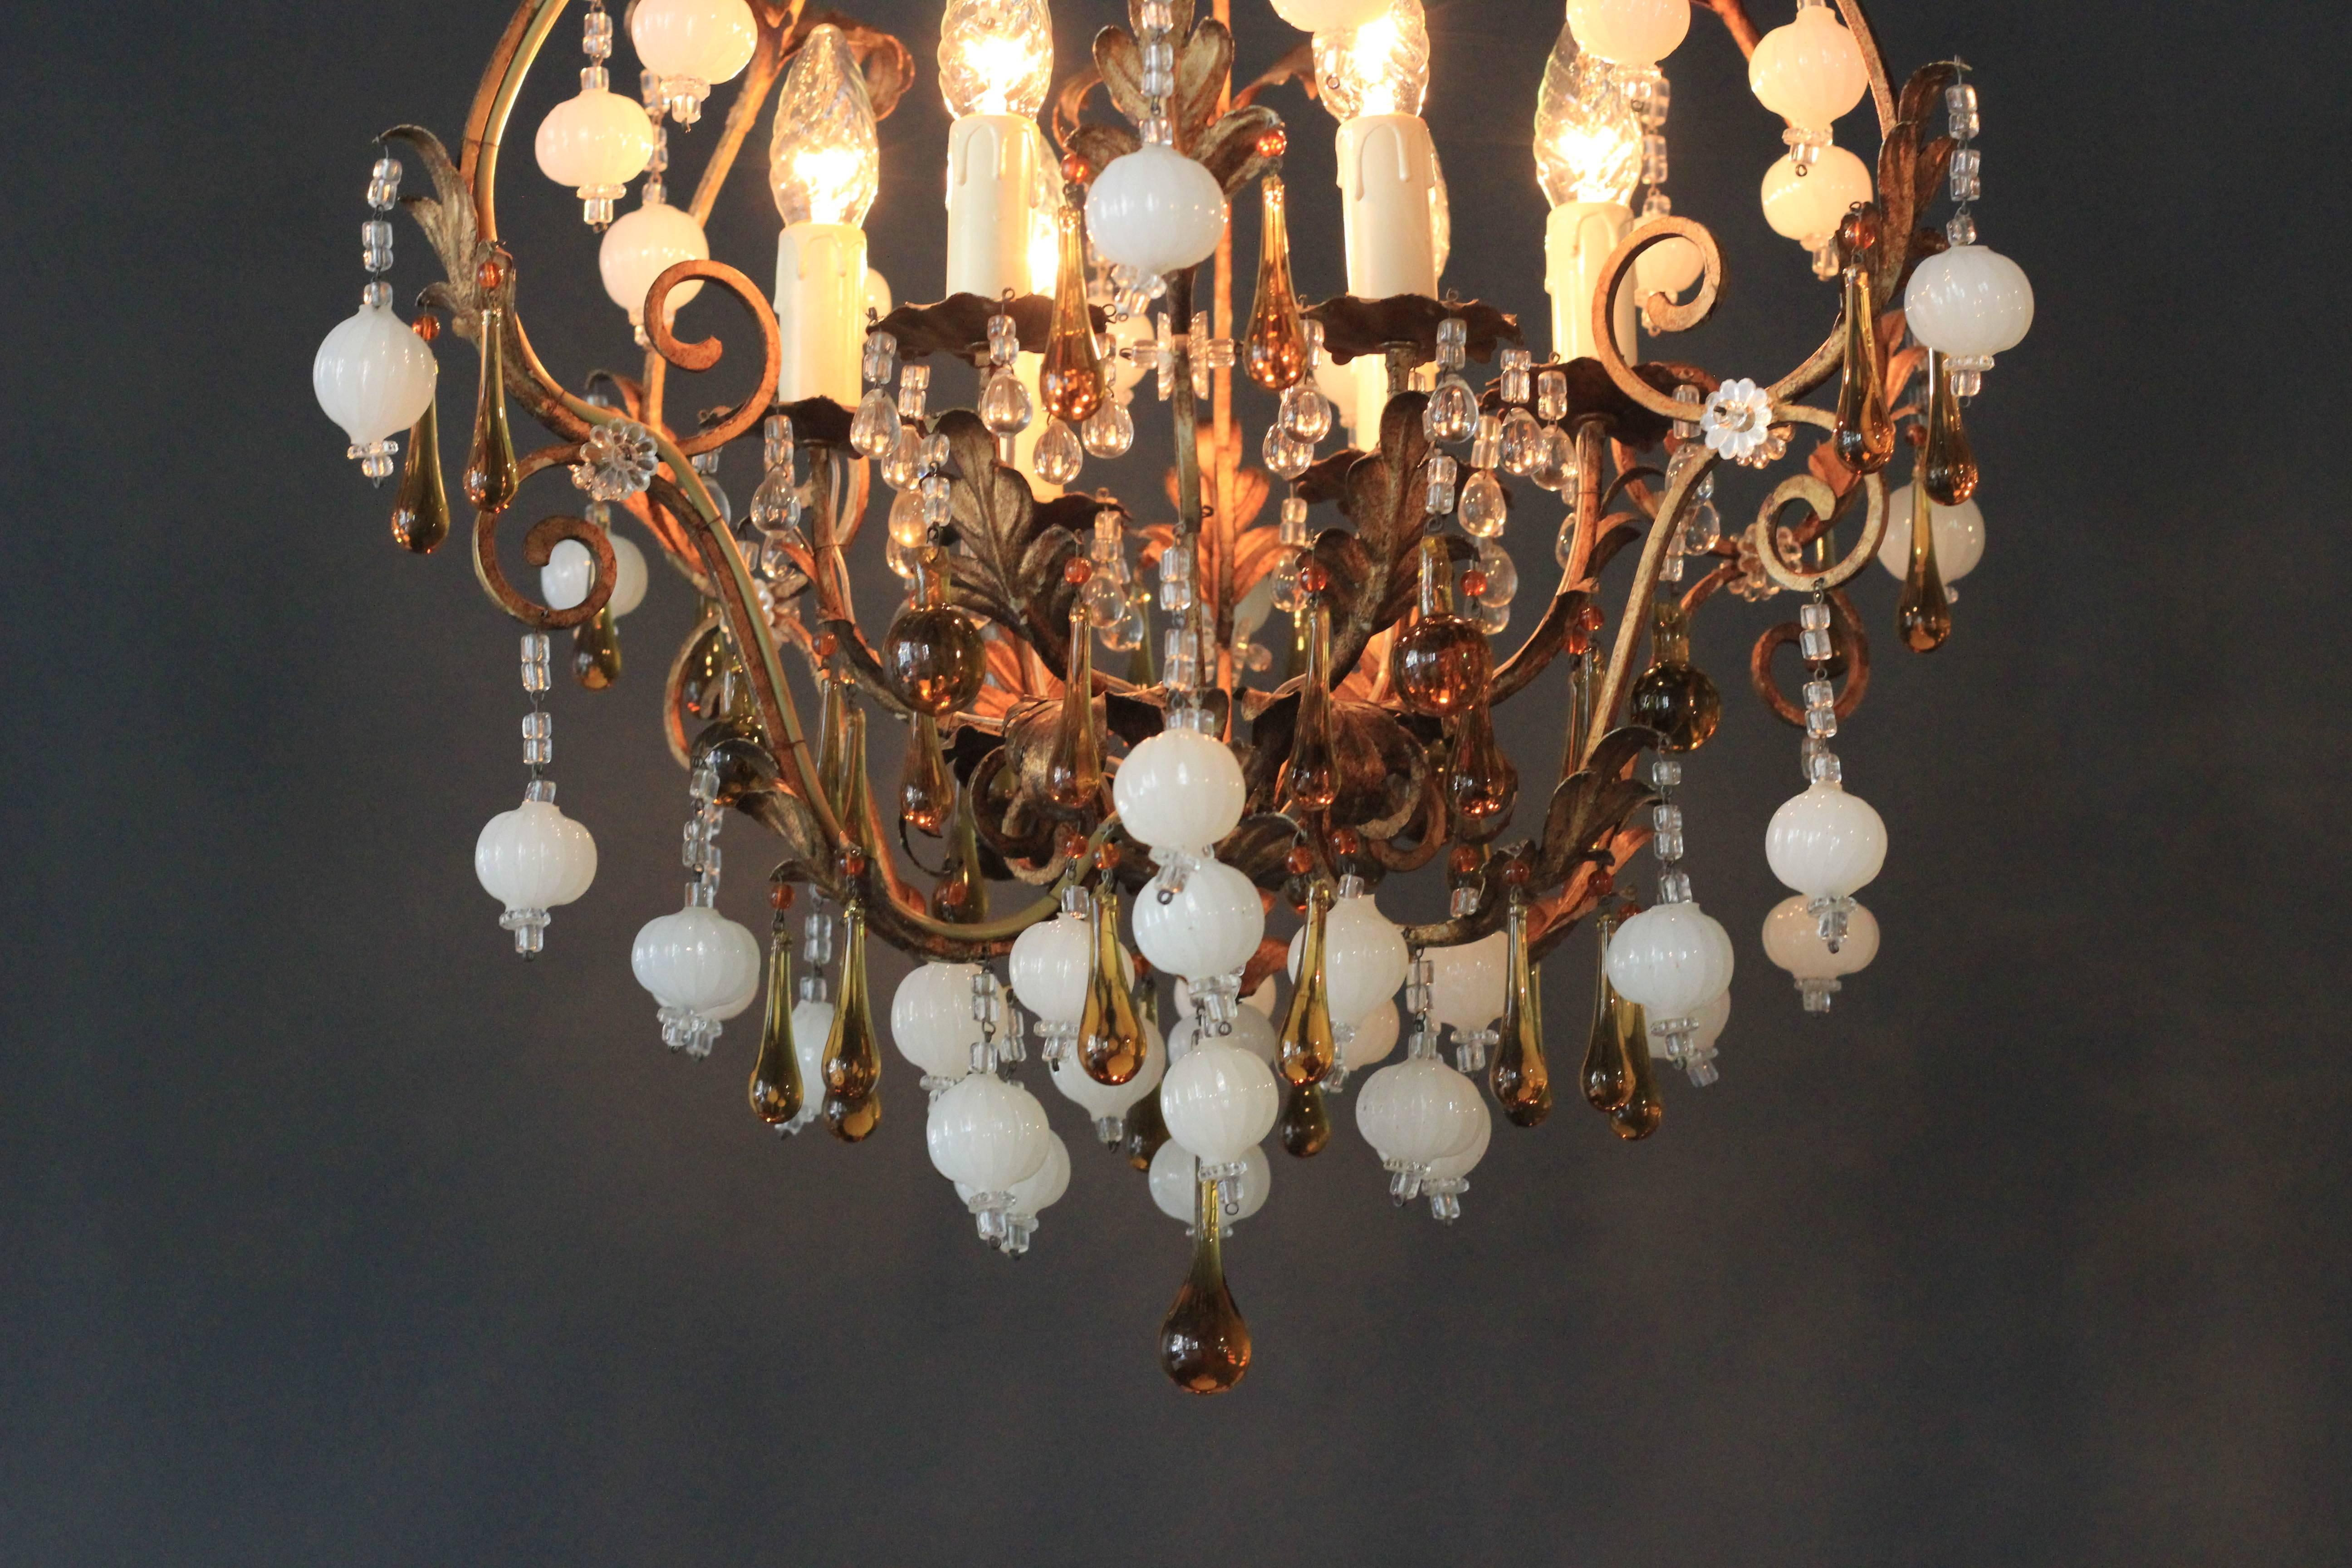 Special Murano Crystal Chandelier White and Brown Colorful Amber Lustré Cage
Old chandelier with love and professionally restored in Berlin. Electrical wiring works in the US.
Re-wired and ready to hang
not one missing
Cabling completely renewed.